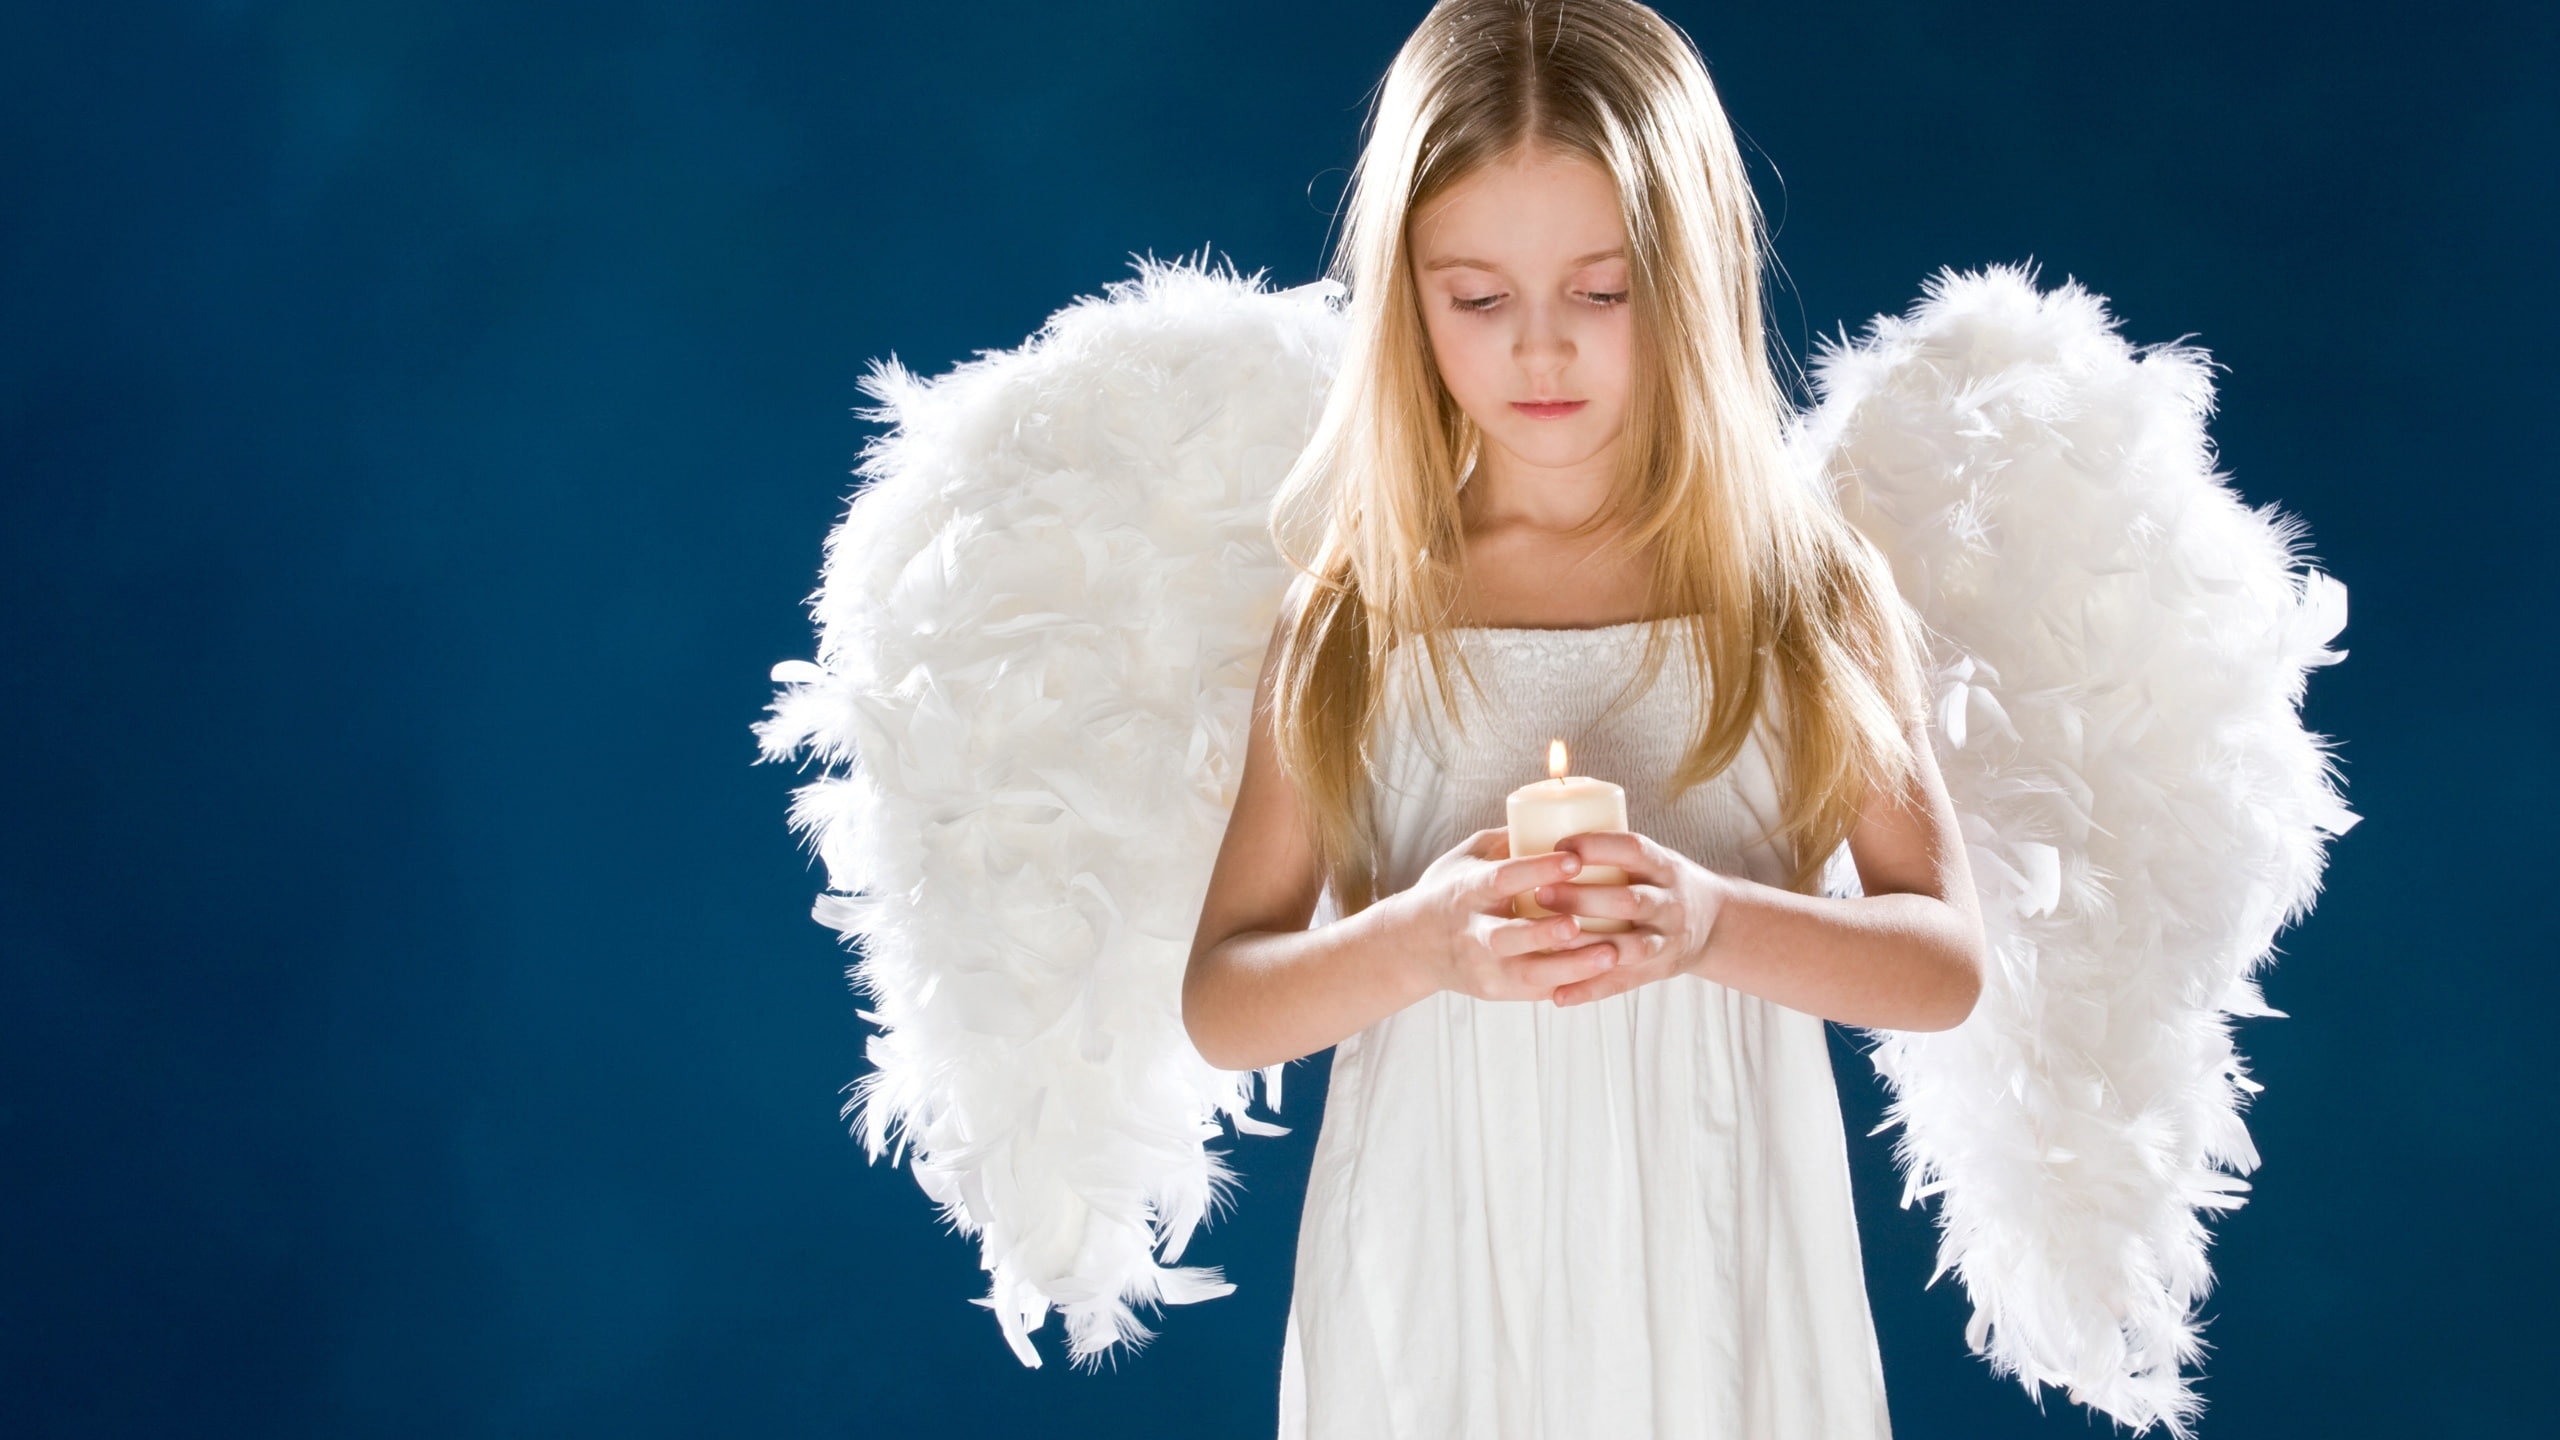 Cute Girl With Wings Is Holding Candle With Hands Wearing White Dress In Blue Wallpaper 2K Cute